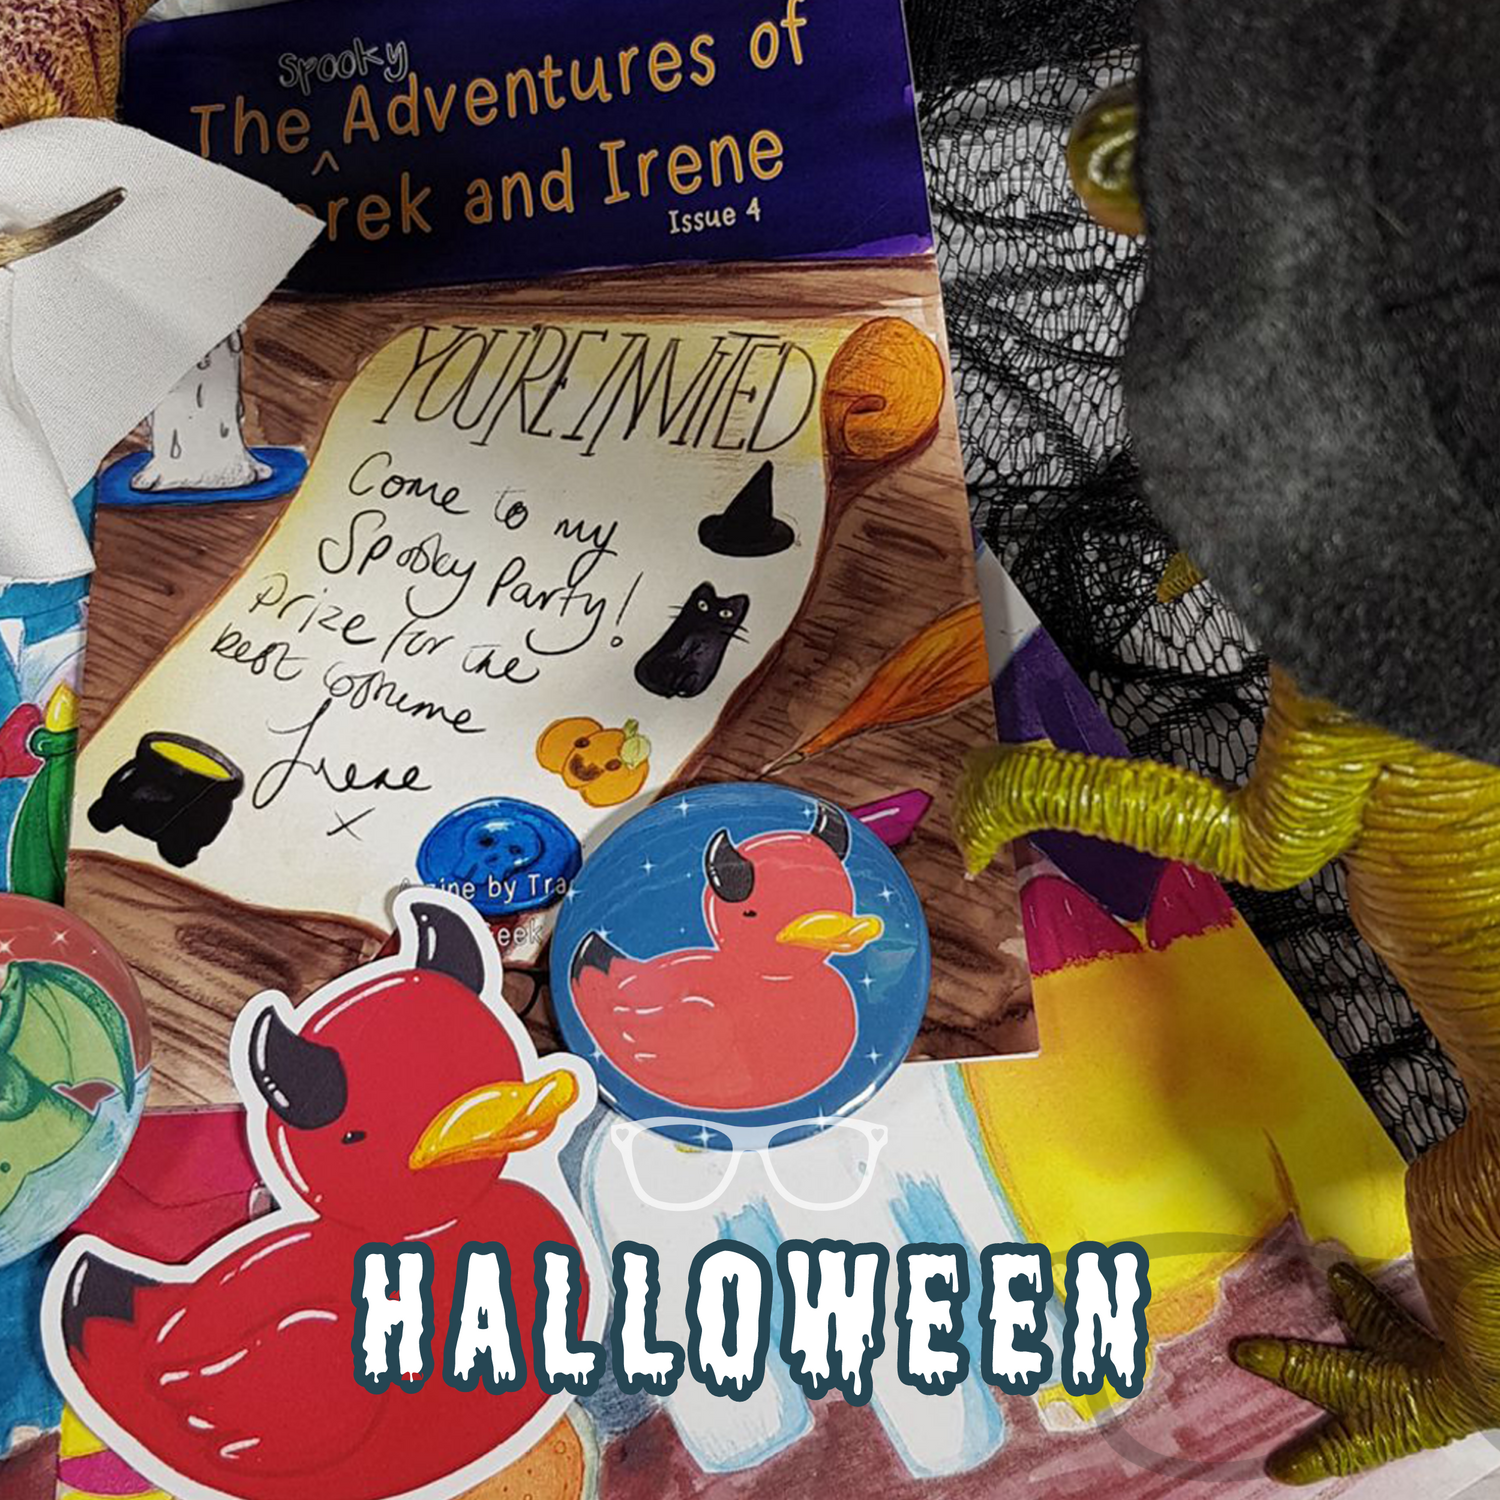 Halloween colletion featuring Issue 4 of the zine, stickers and badges